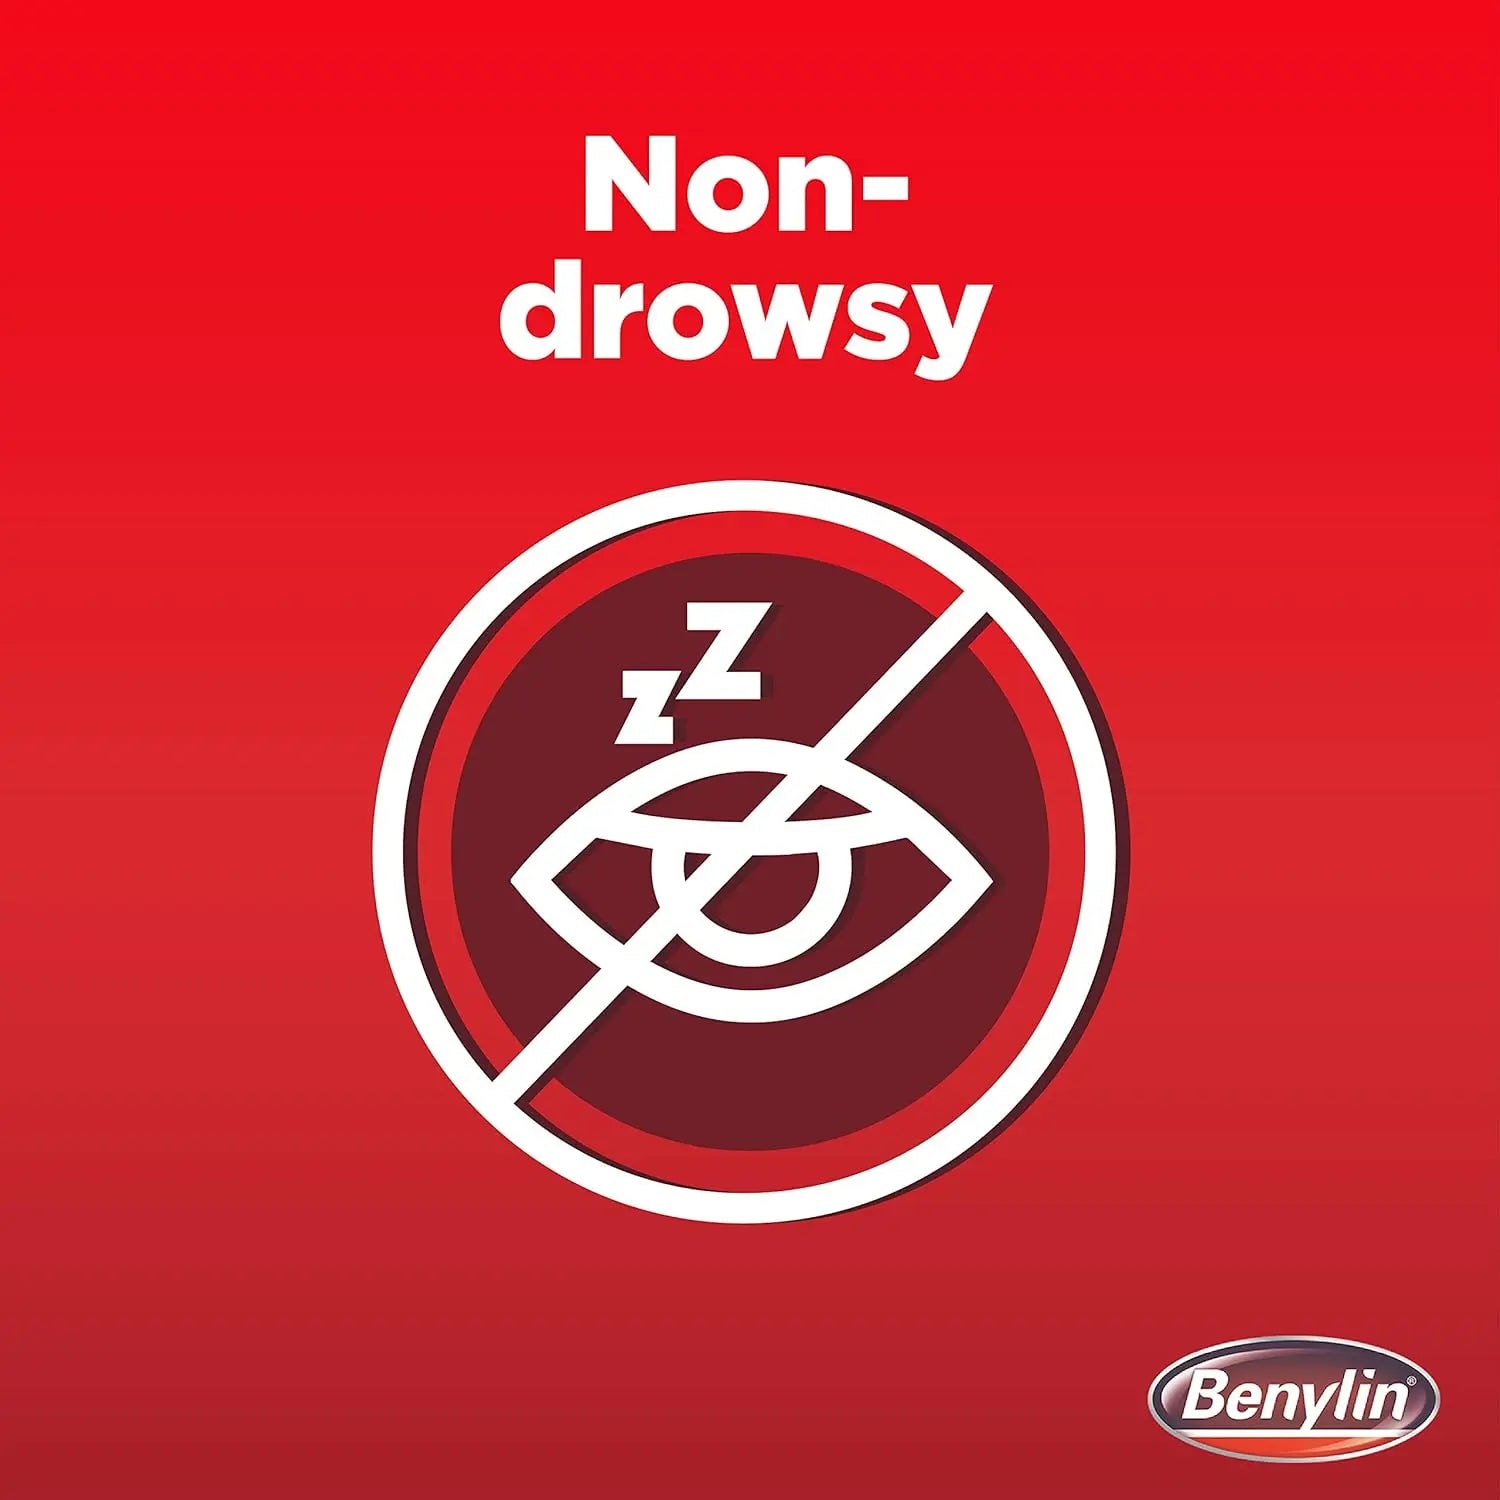 Benylin Chesty Coughs Non-Drowsy, 300ml Syrup Benylin